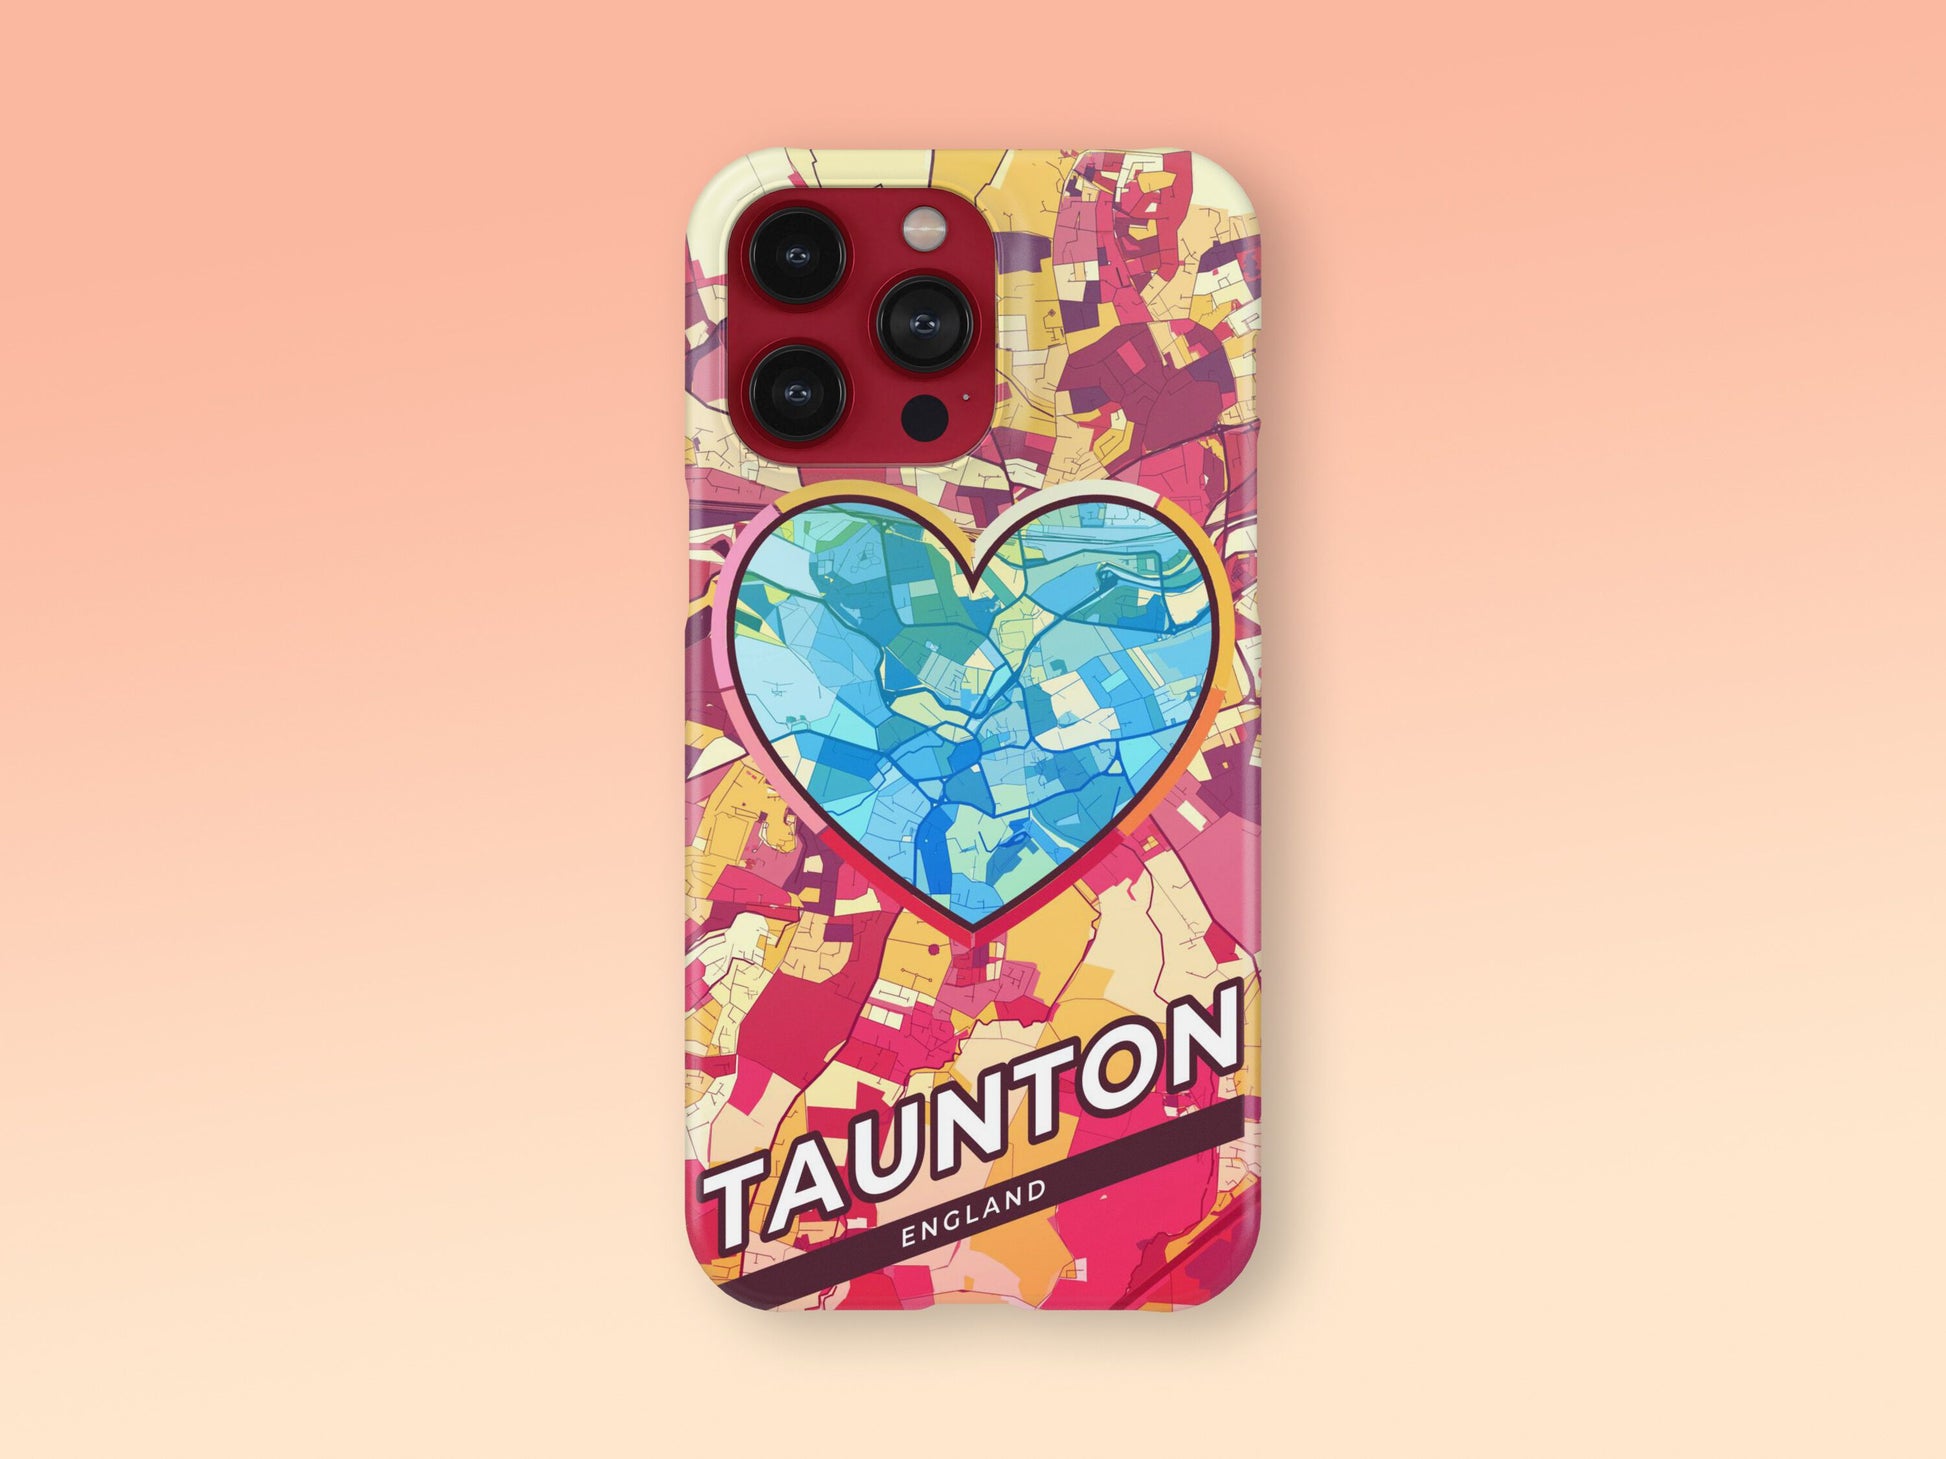 Taunton England slim phone case with colorful icon 2